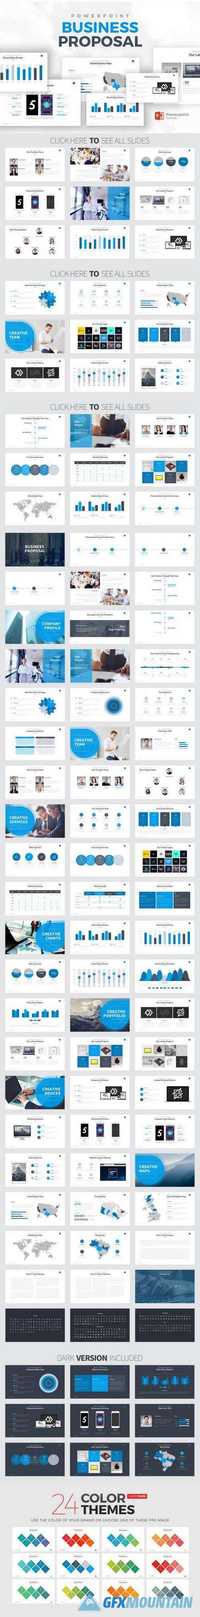 Business Proposal PowerPoint 575444